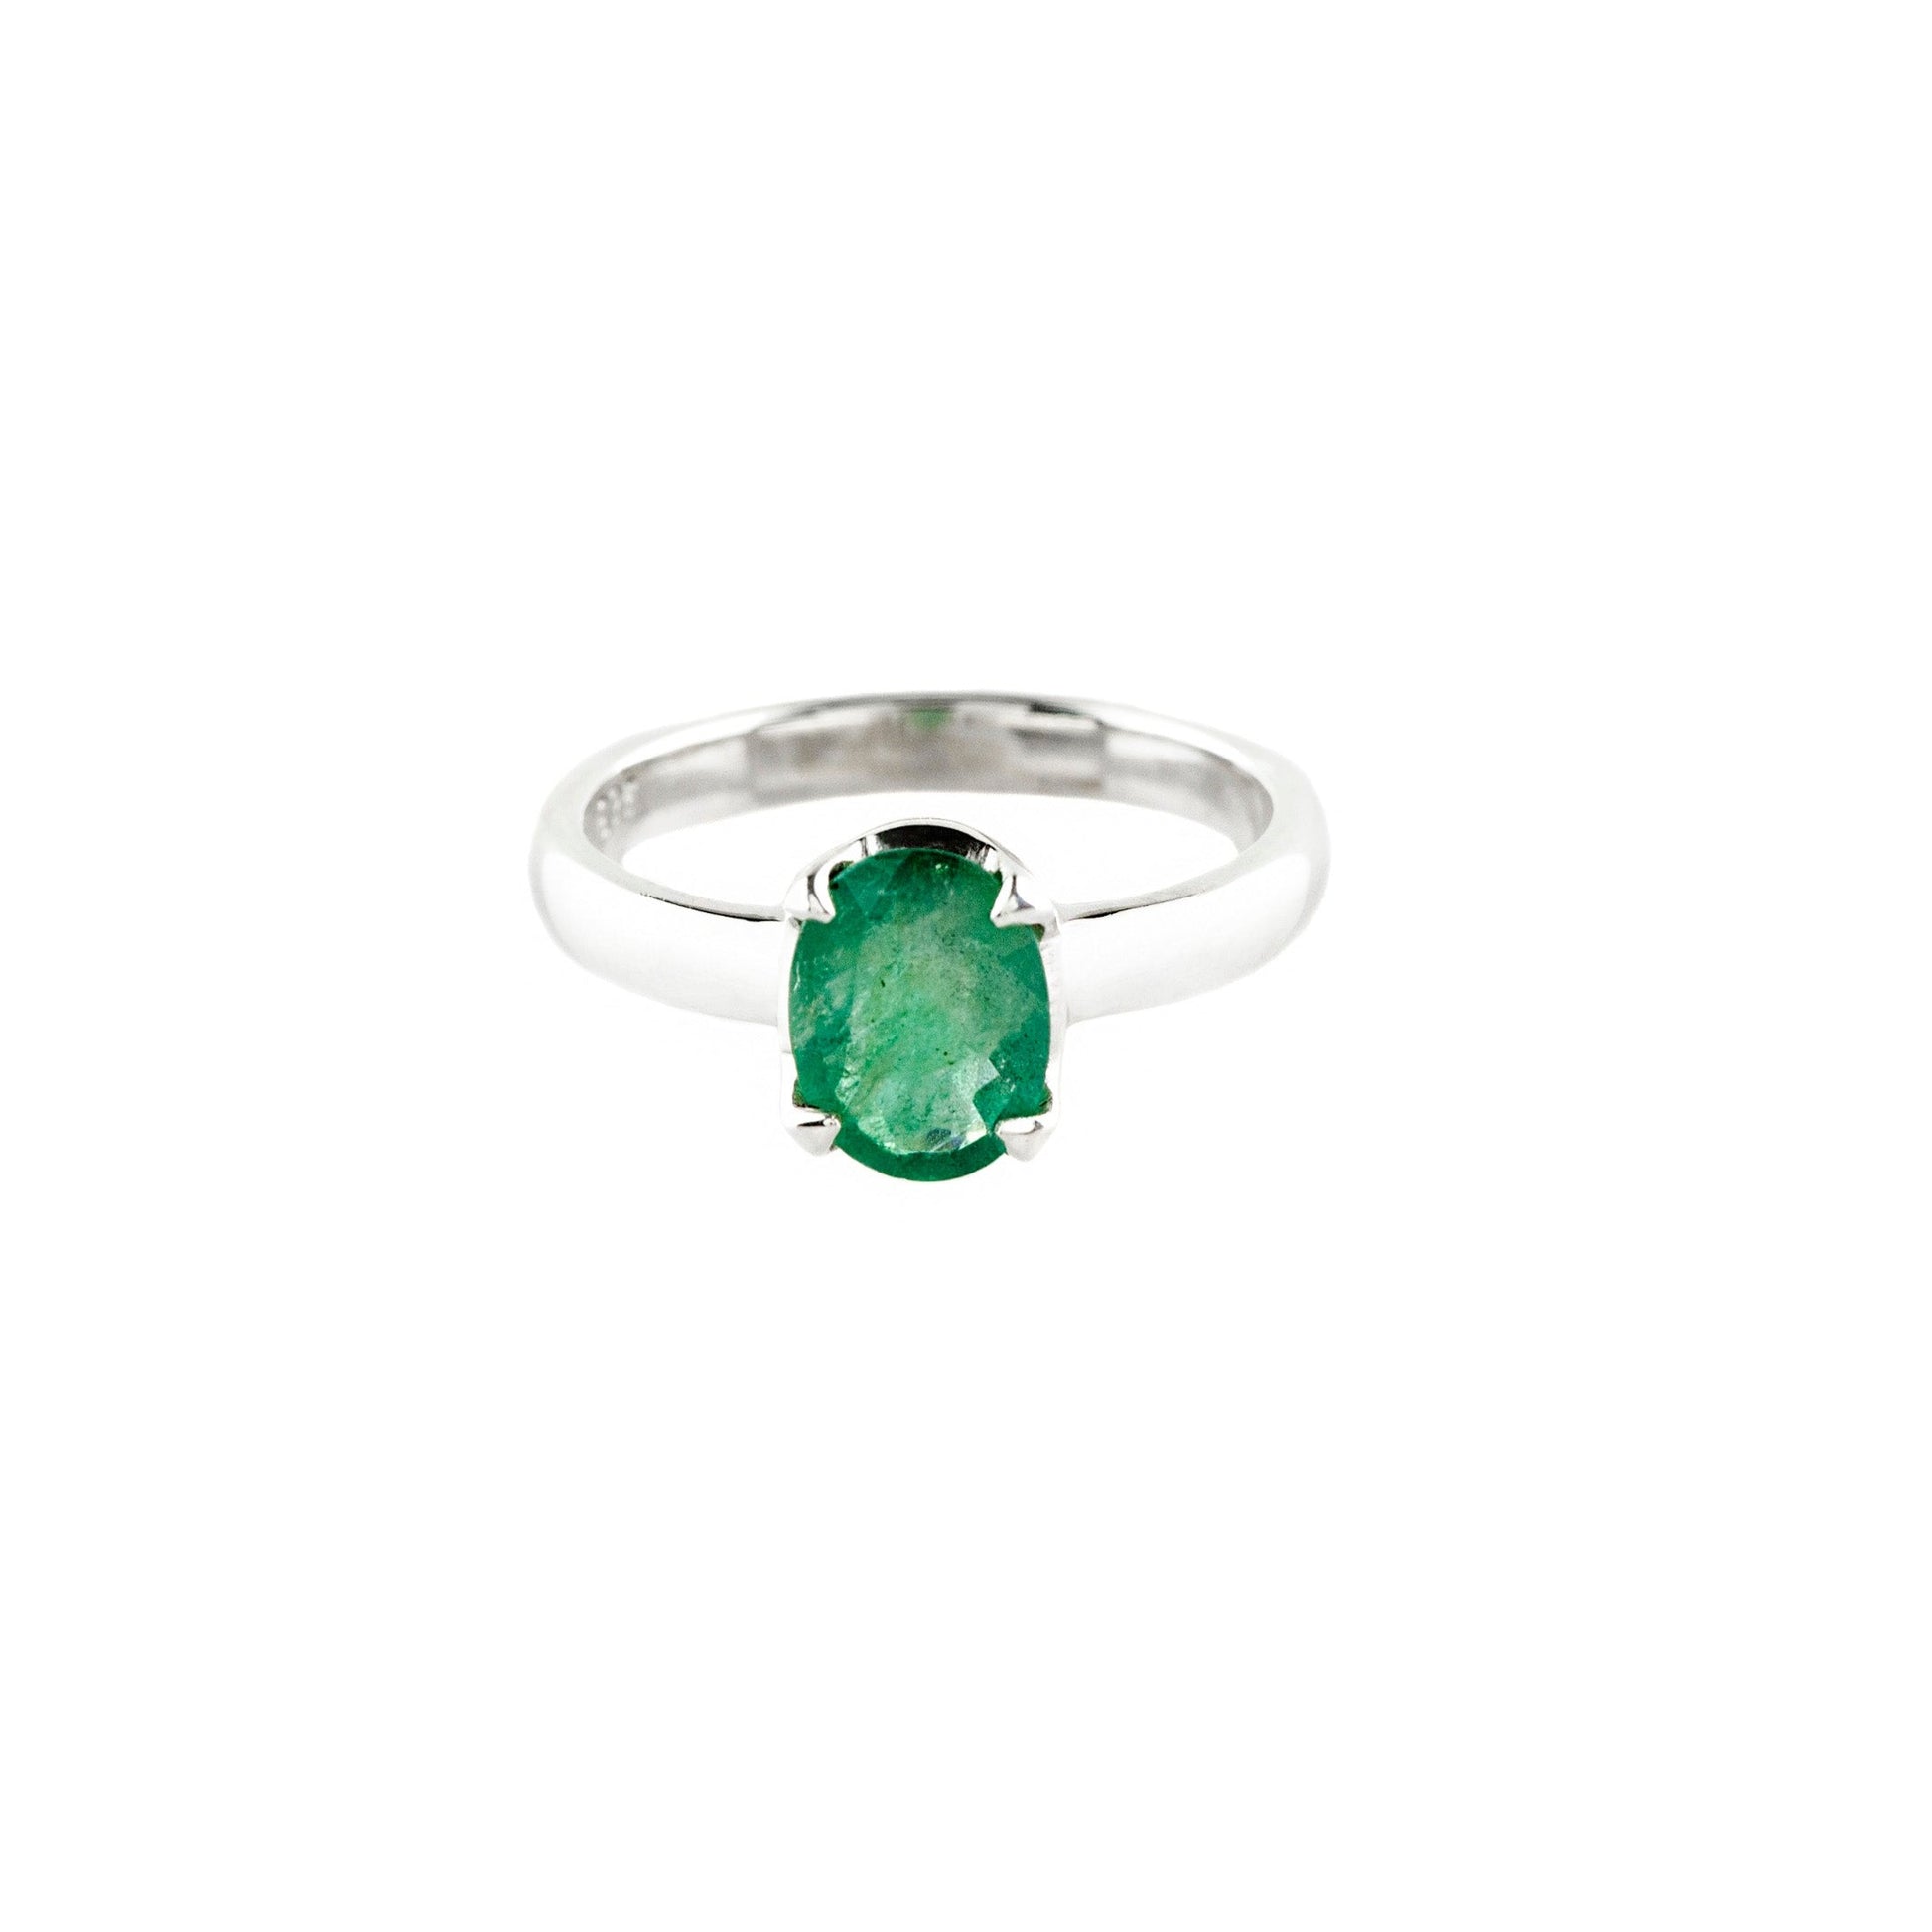 Emerald Oval Faceted Sterling Silver Ring - Twisted Earth Artistry